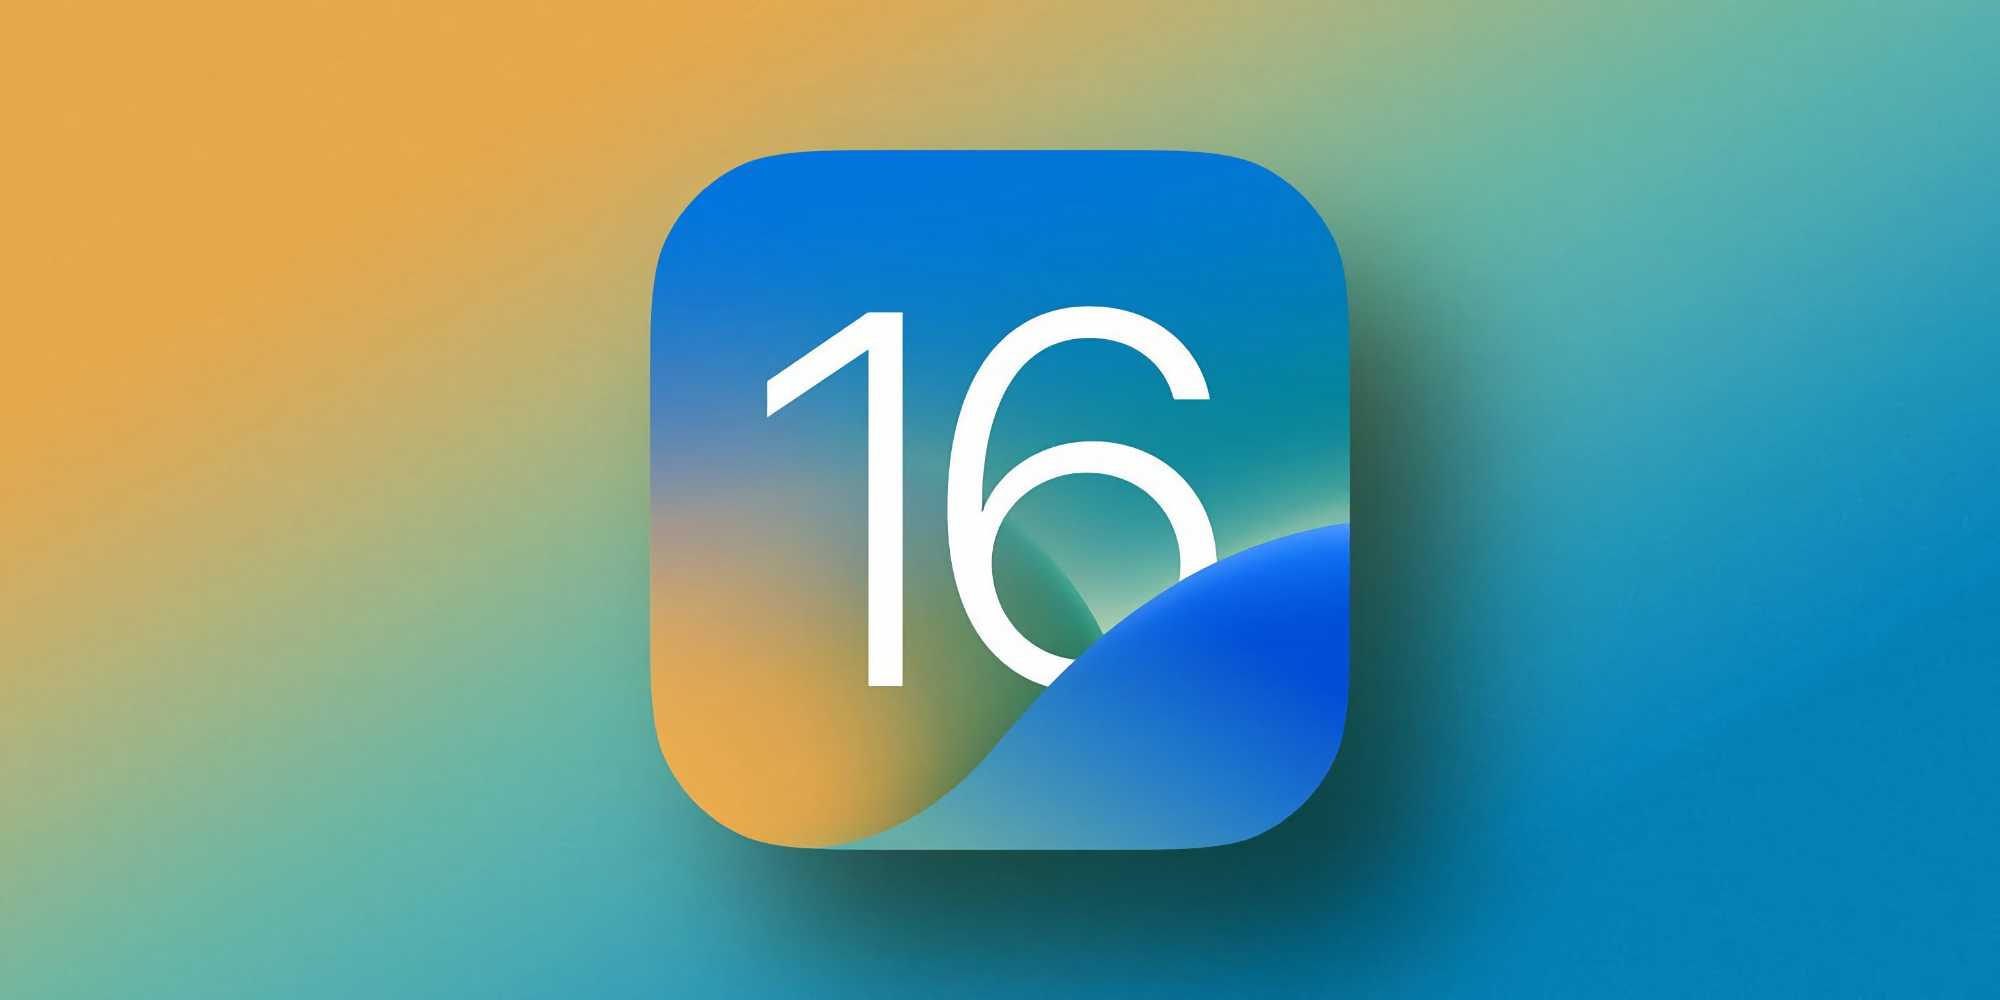 Apple has stopped signing iOS 16.6.1: rolling back from iOS 17 to iOS 16 is no longer possible